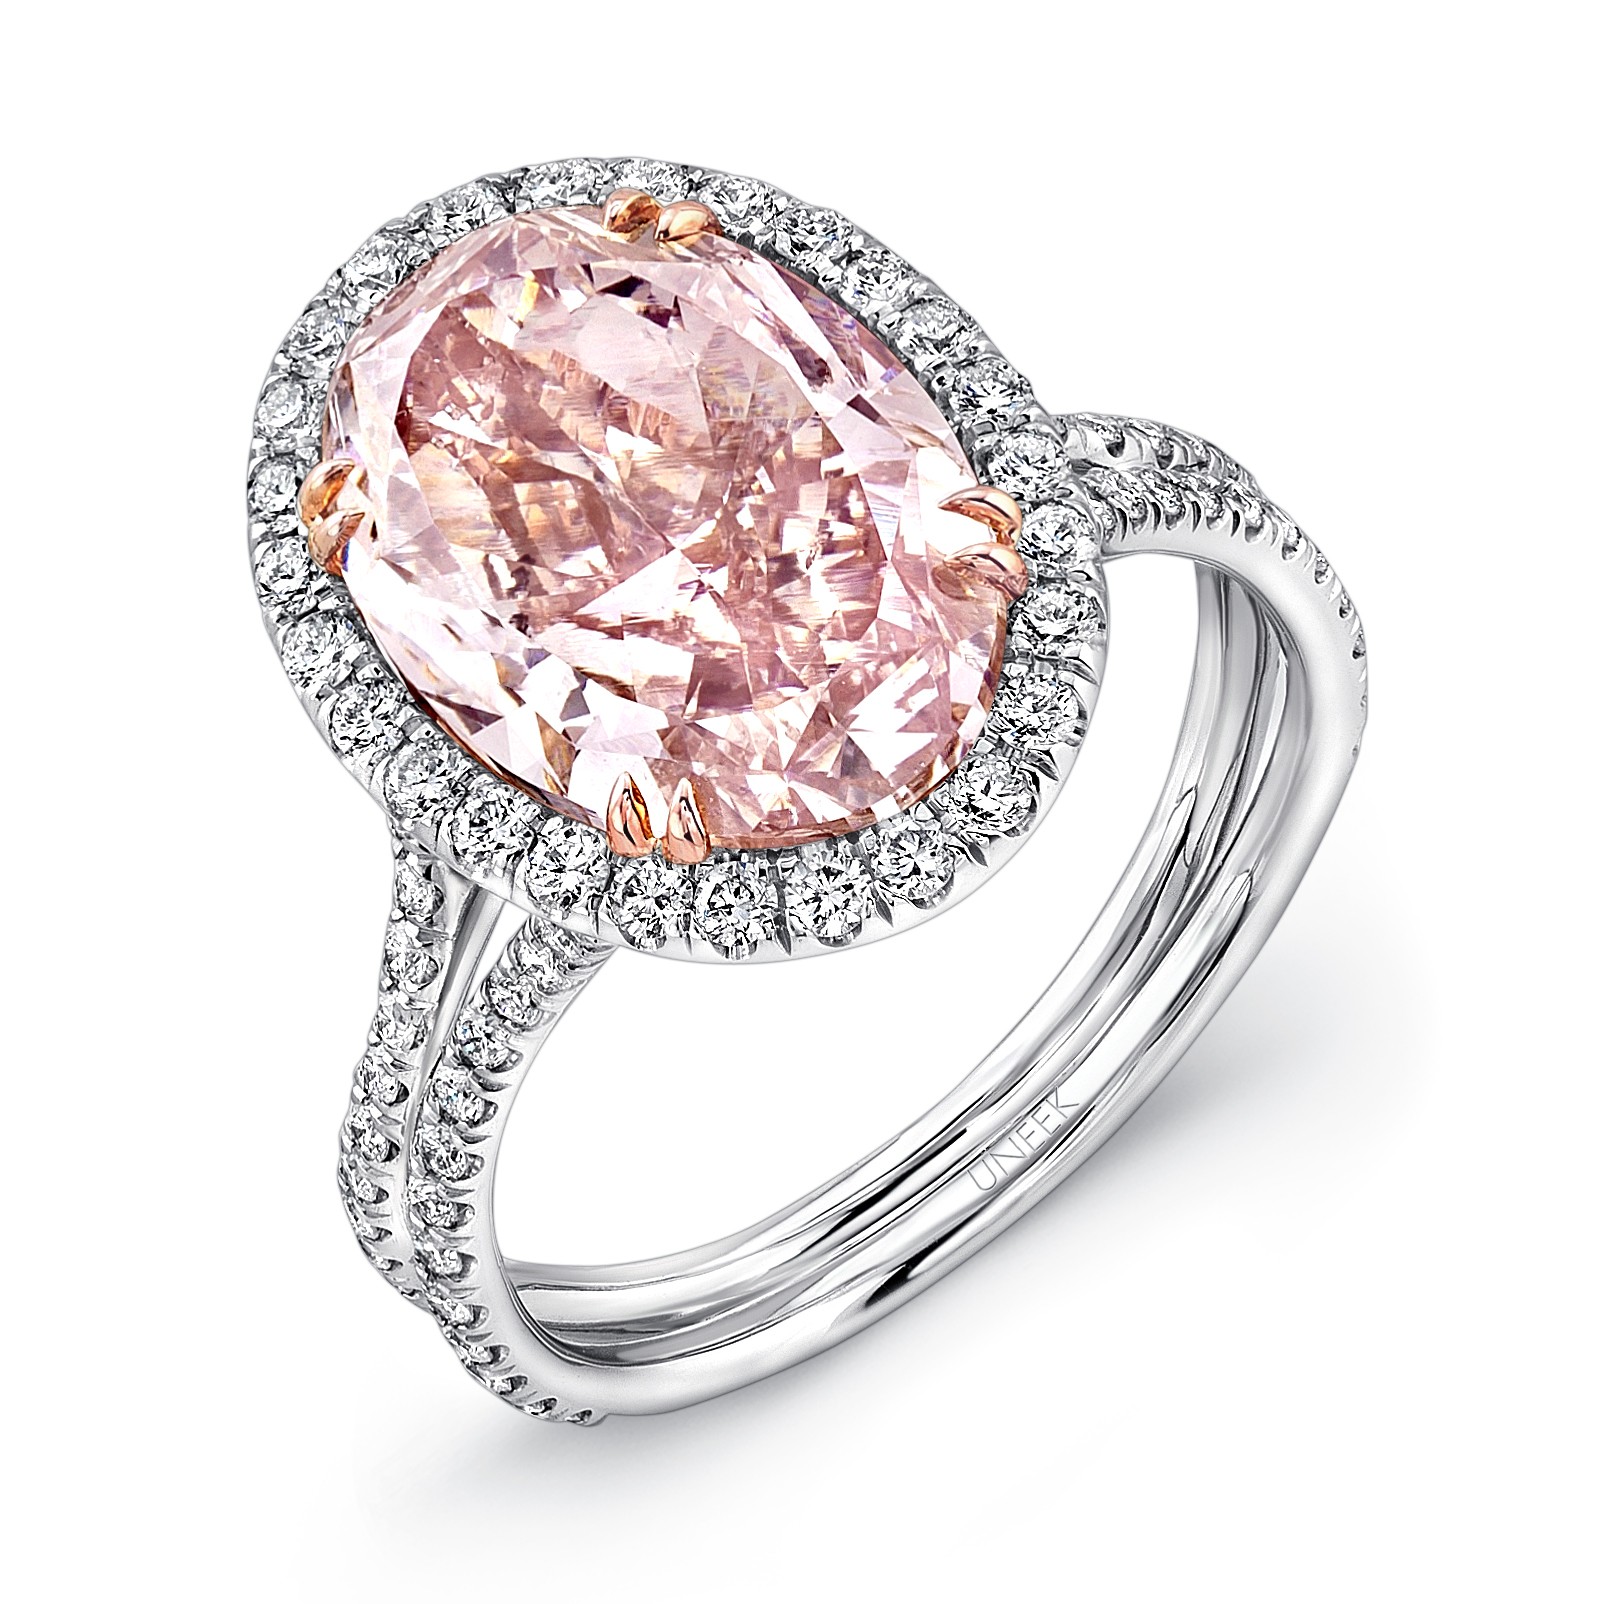 Pink diamond engagement rings conquest